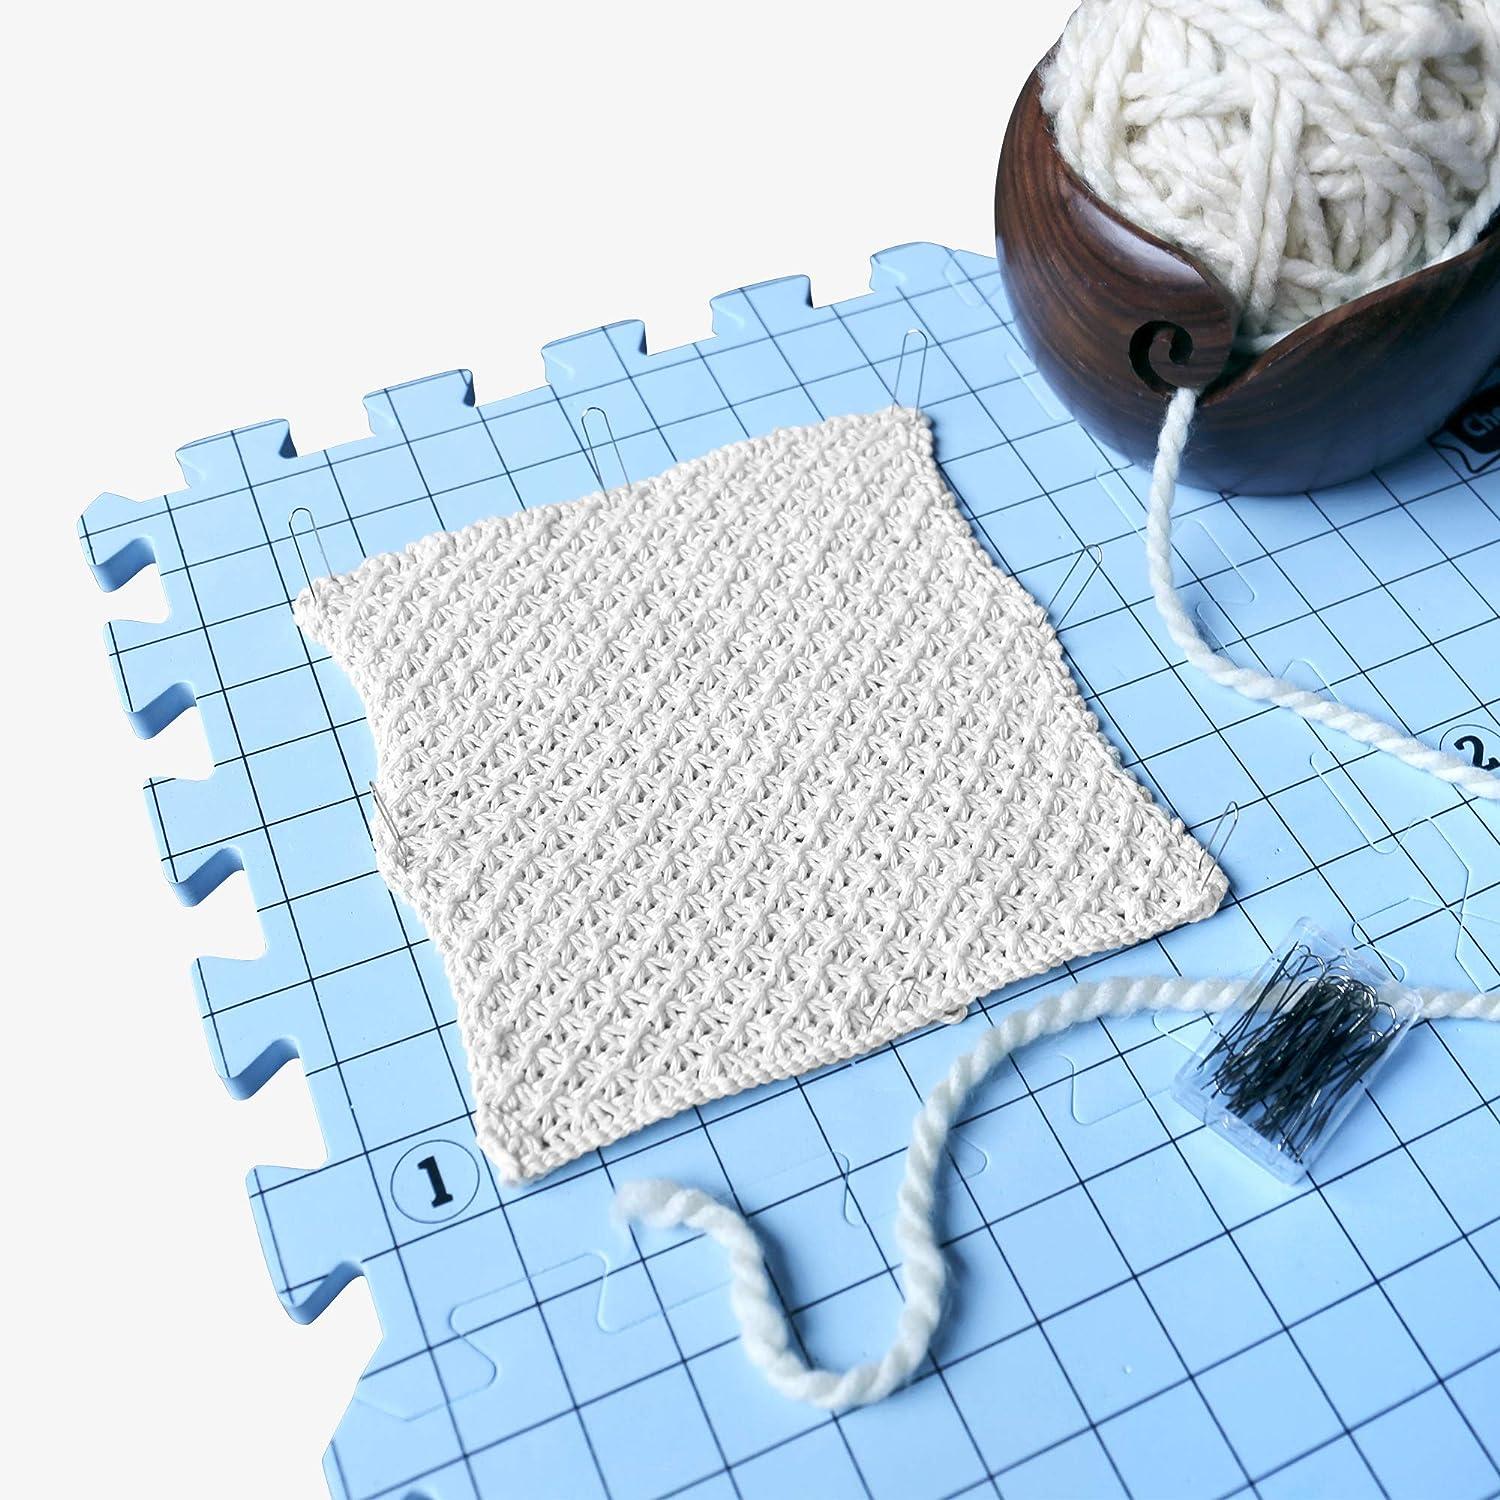 Cheers to Ewe! Foam Knitting Block Mat, Grid Blocking for Knitting Accuracy  and Crochet, Inch Thick with 1 Inch Grid, Pack of 9